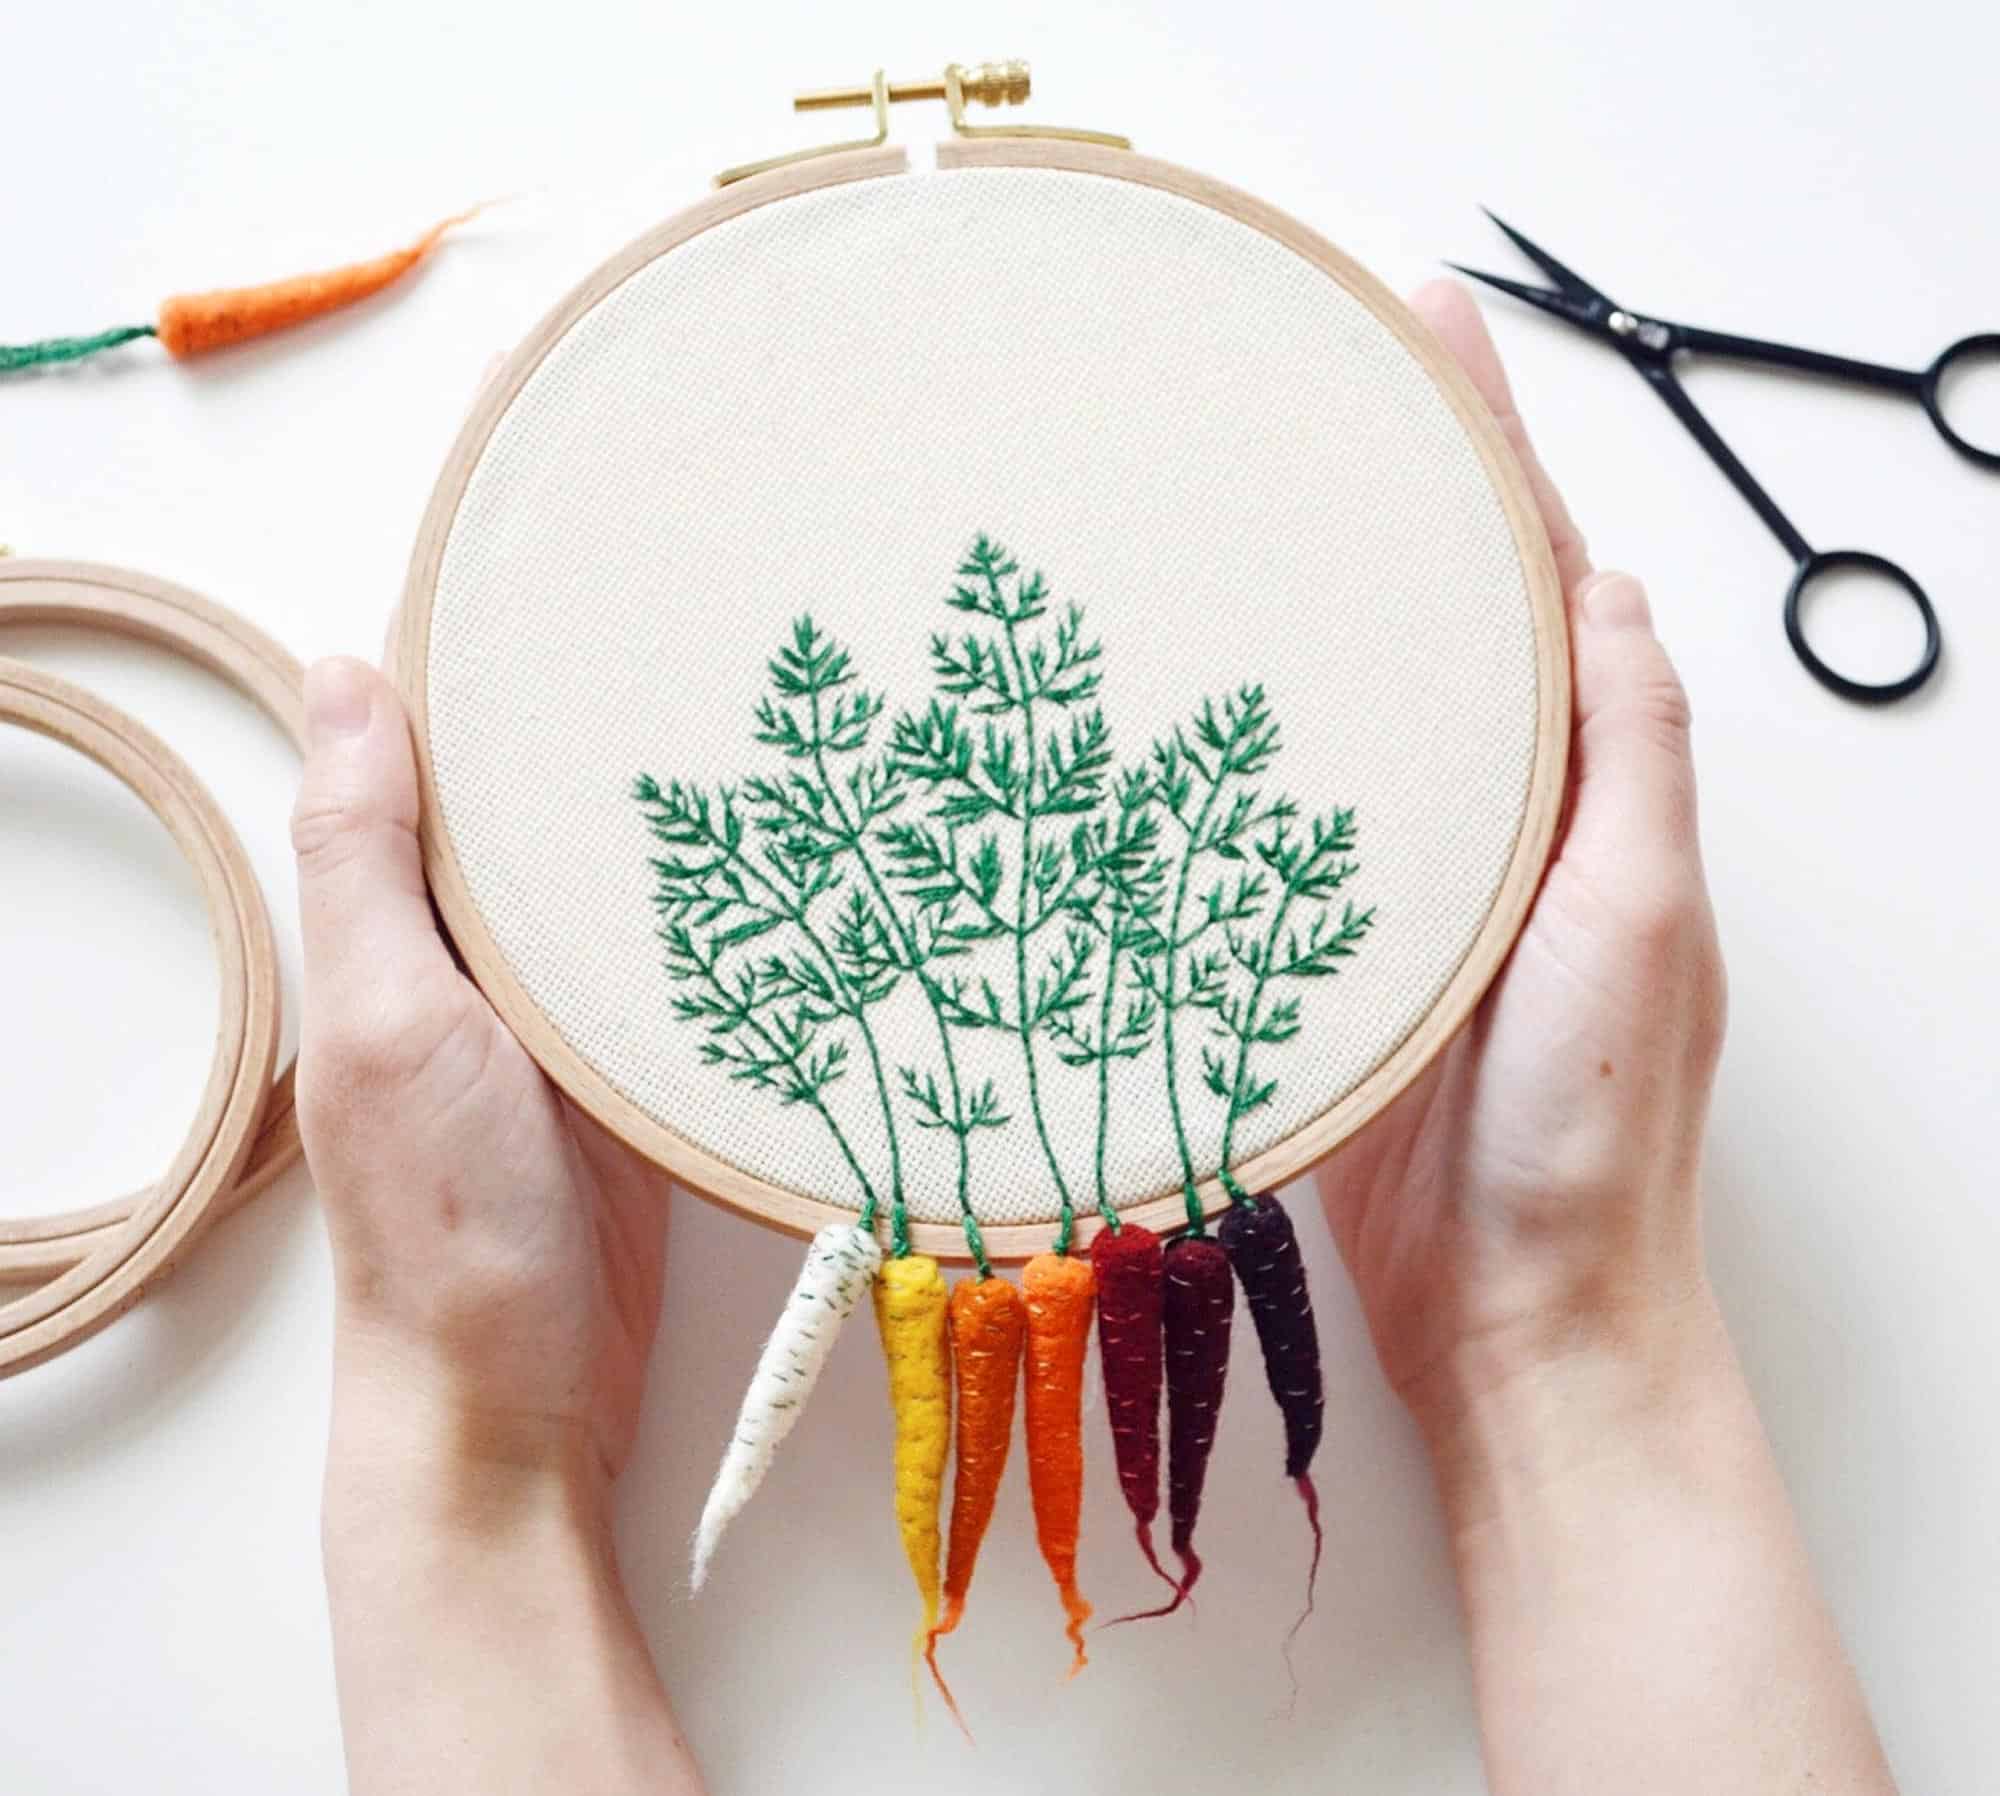 Planted carrots felt and embroidery hoop art